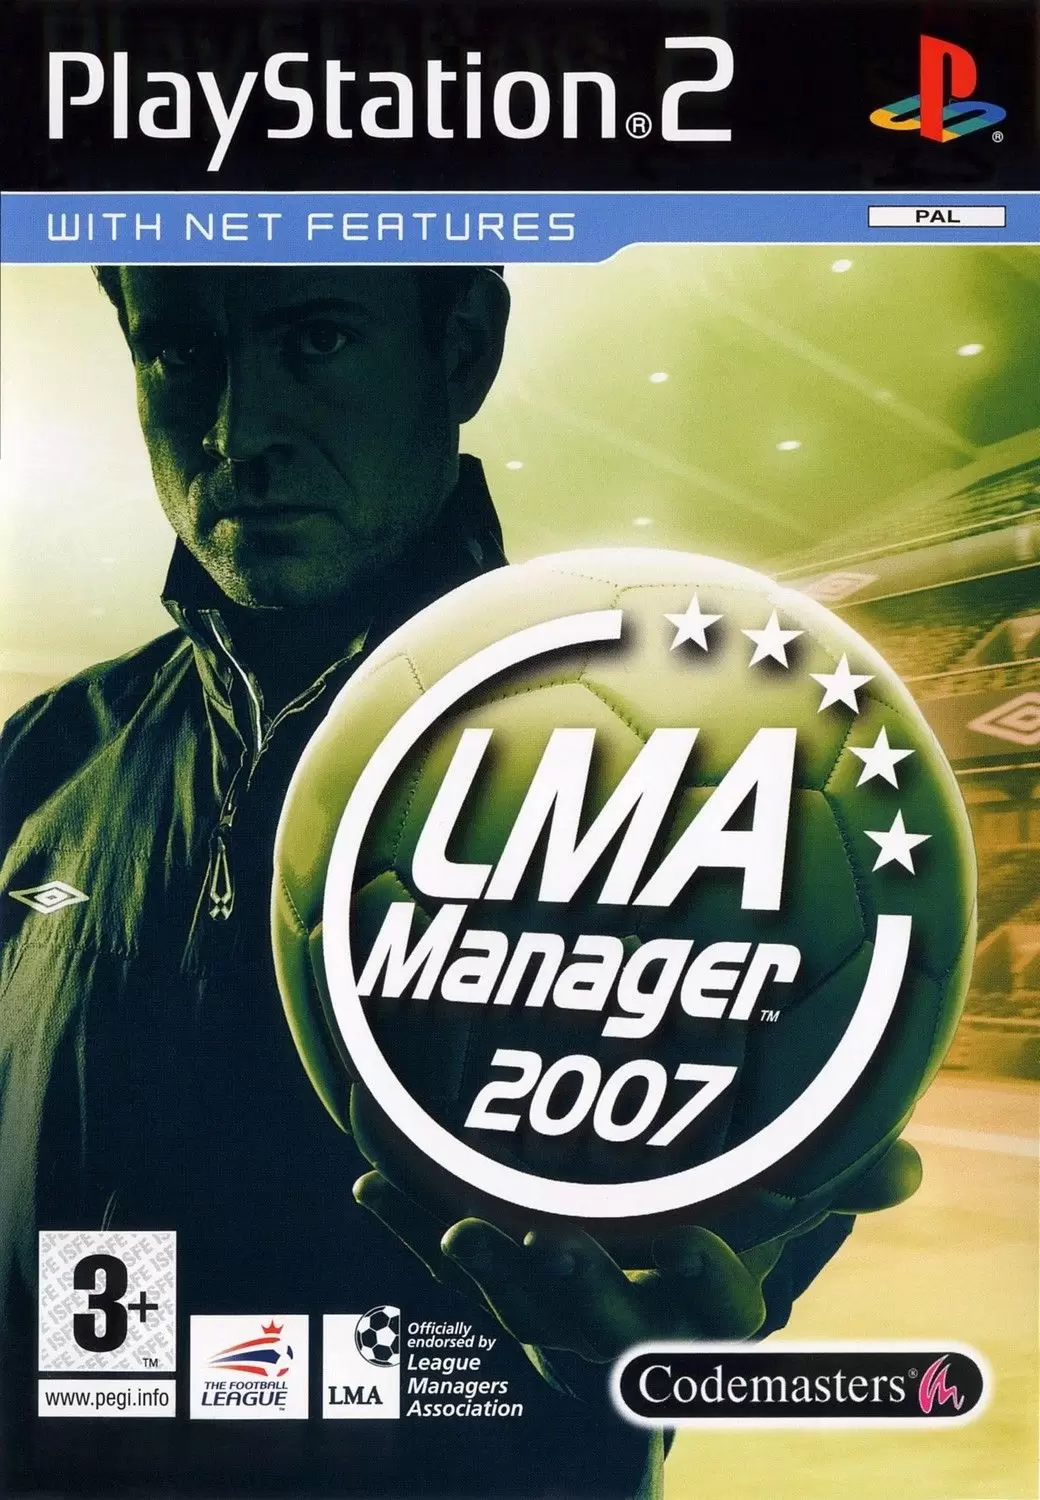 PS2 Games - LMA Manager 2007